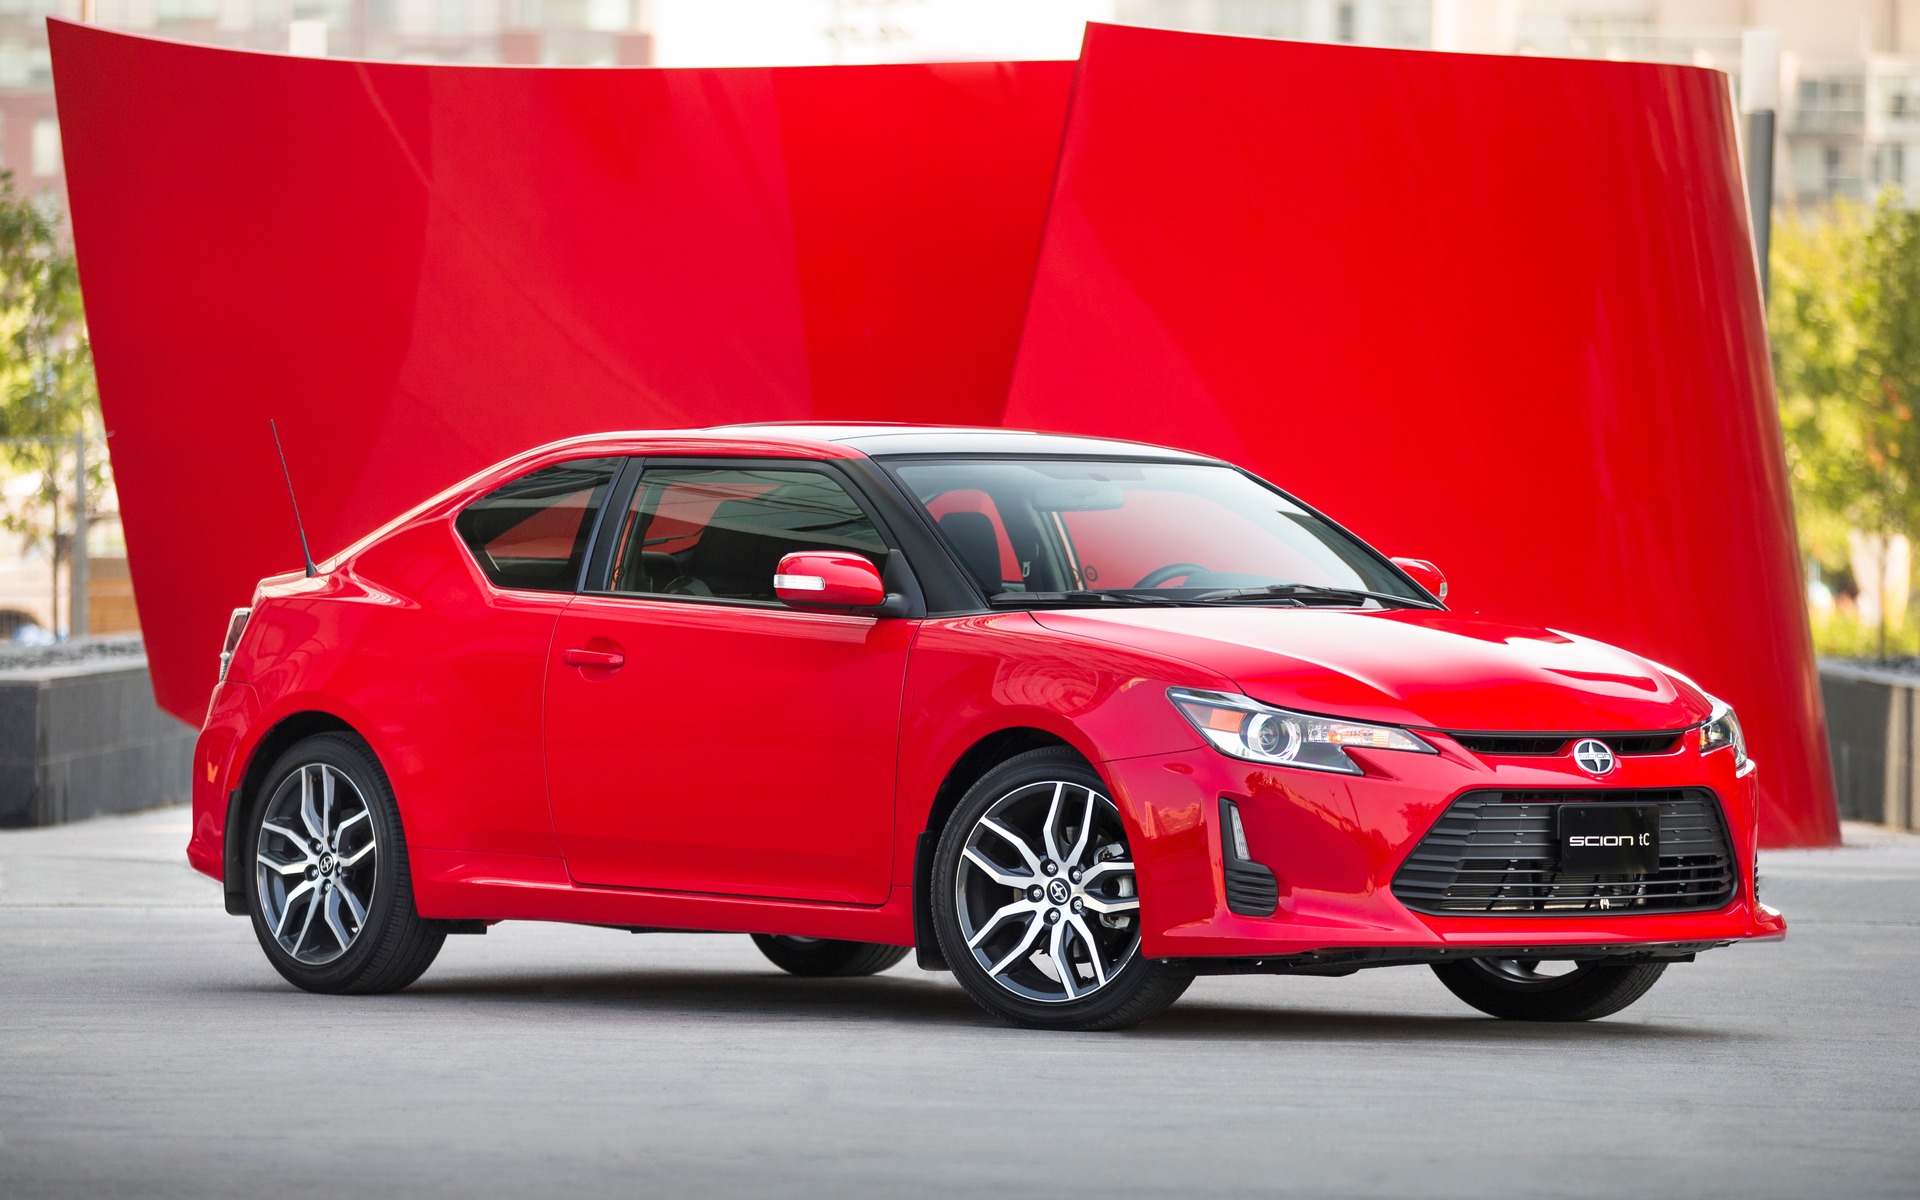 2016 Scion tC - News, reviews, picture galleries and videos - The Car Guide